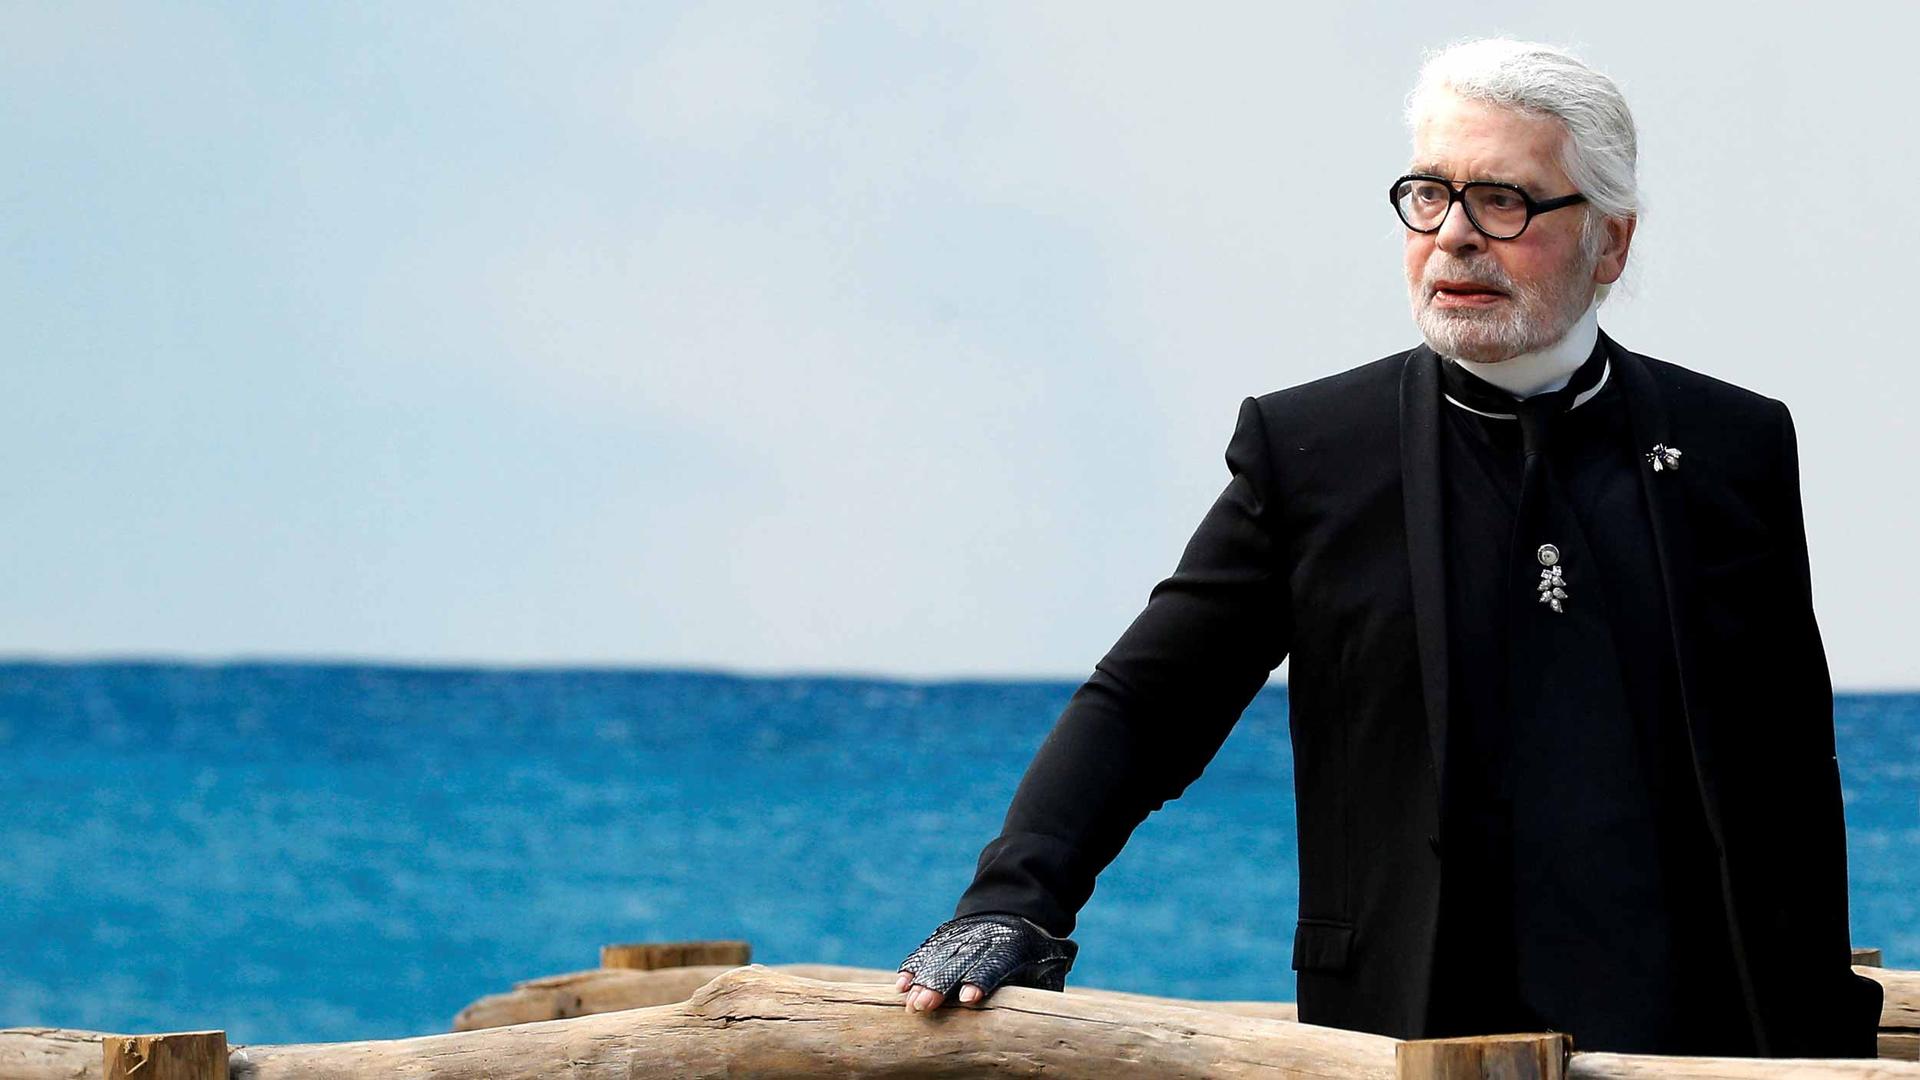 German designer Karl Lagerfeld stands before an ocean backdrop at a fashion show.